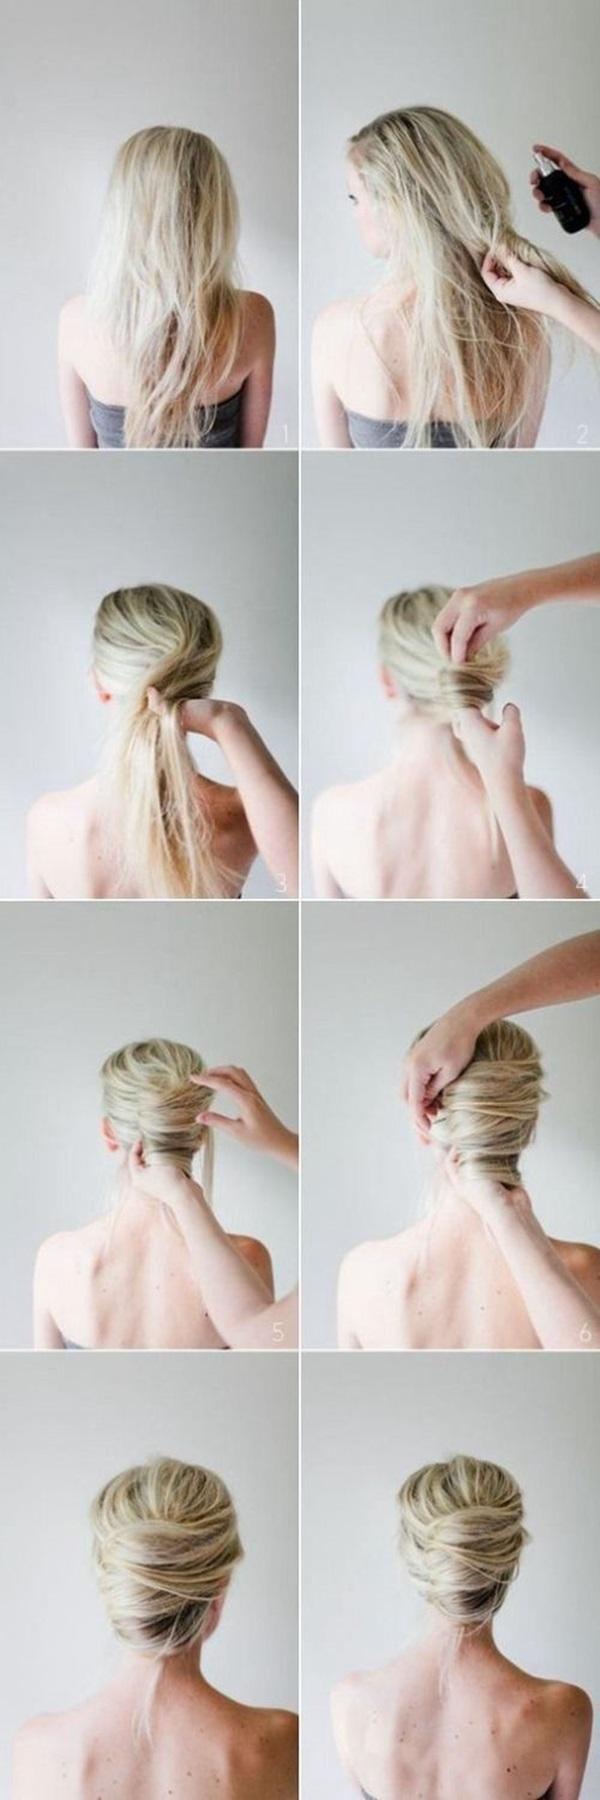 Mariage - 35 DIY Hairstyle Tutorials With Pictures 